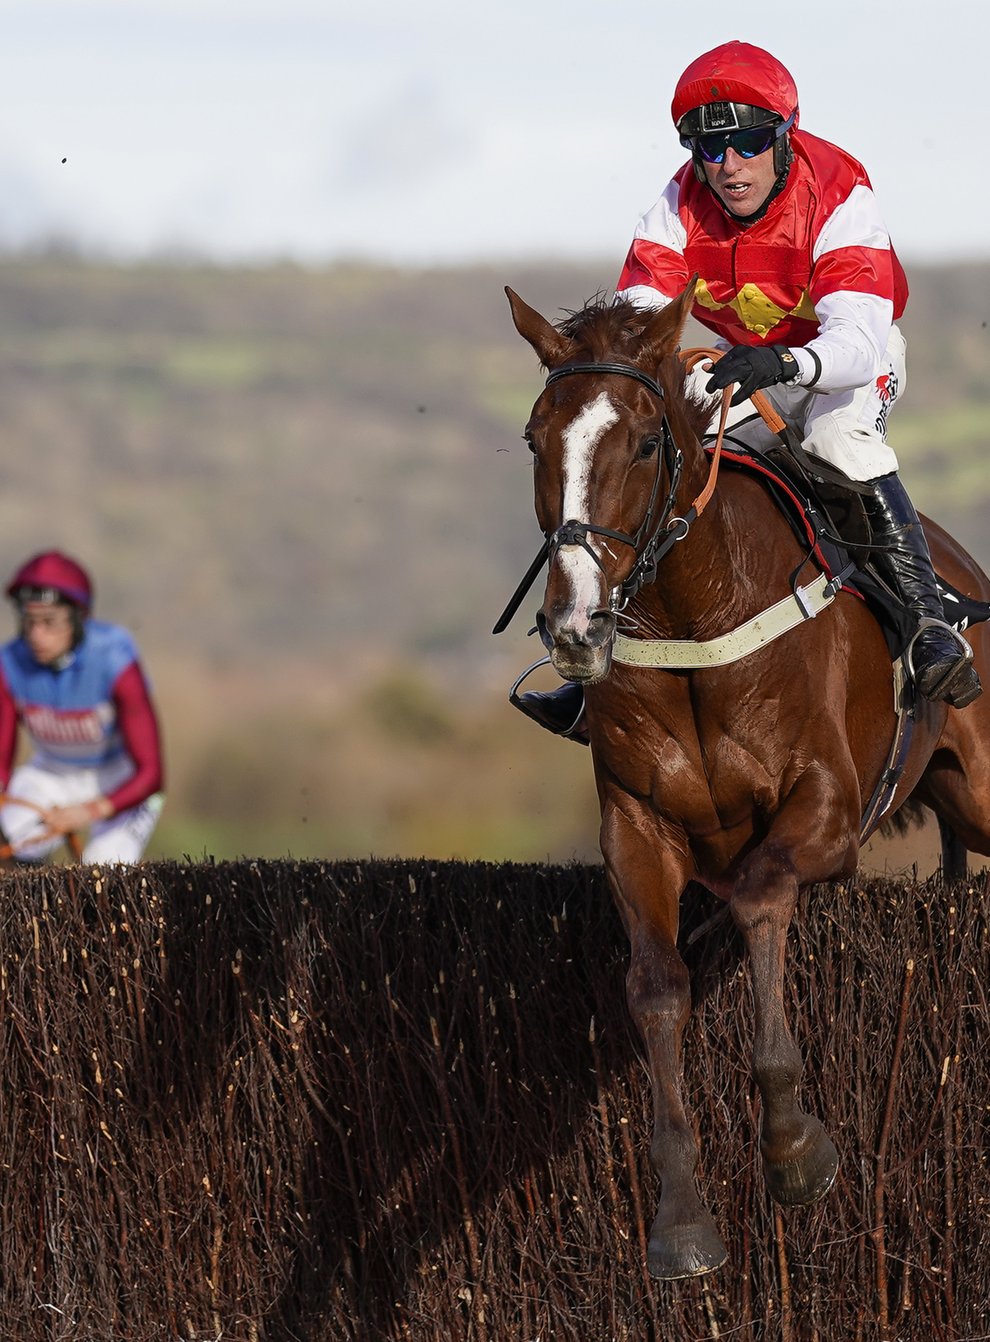 The Big Breakaway is likely to make his next start at Wetherby